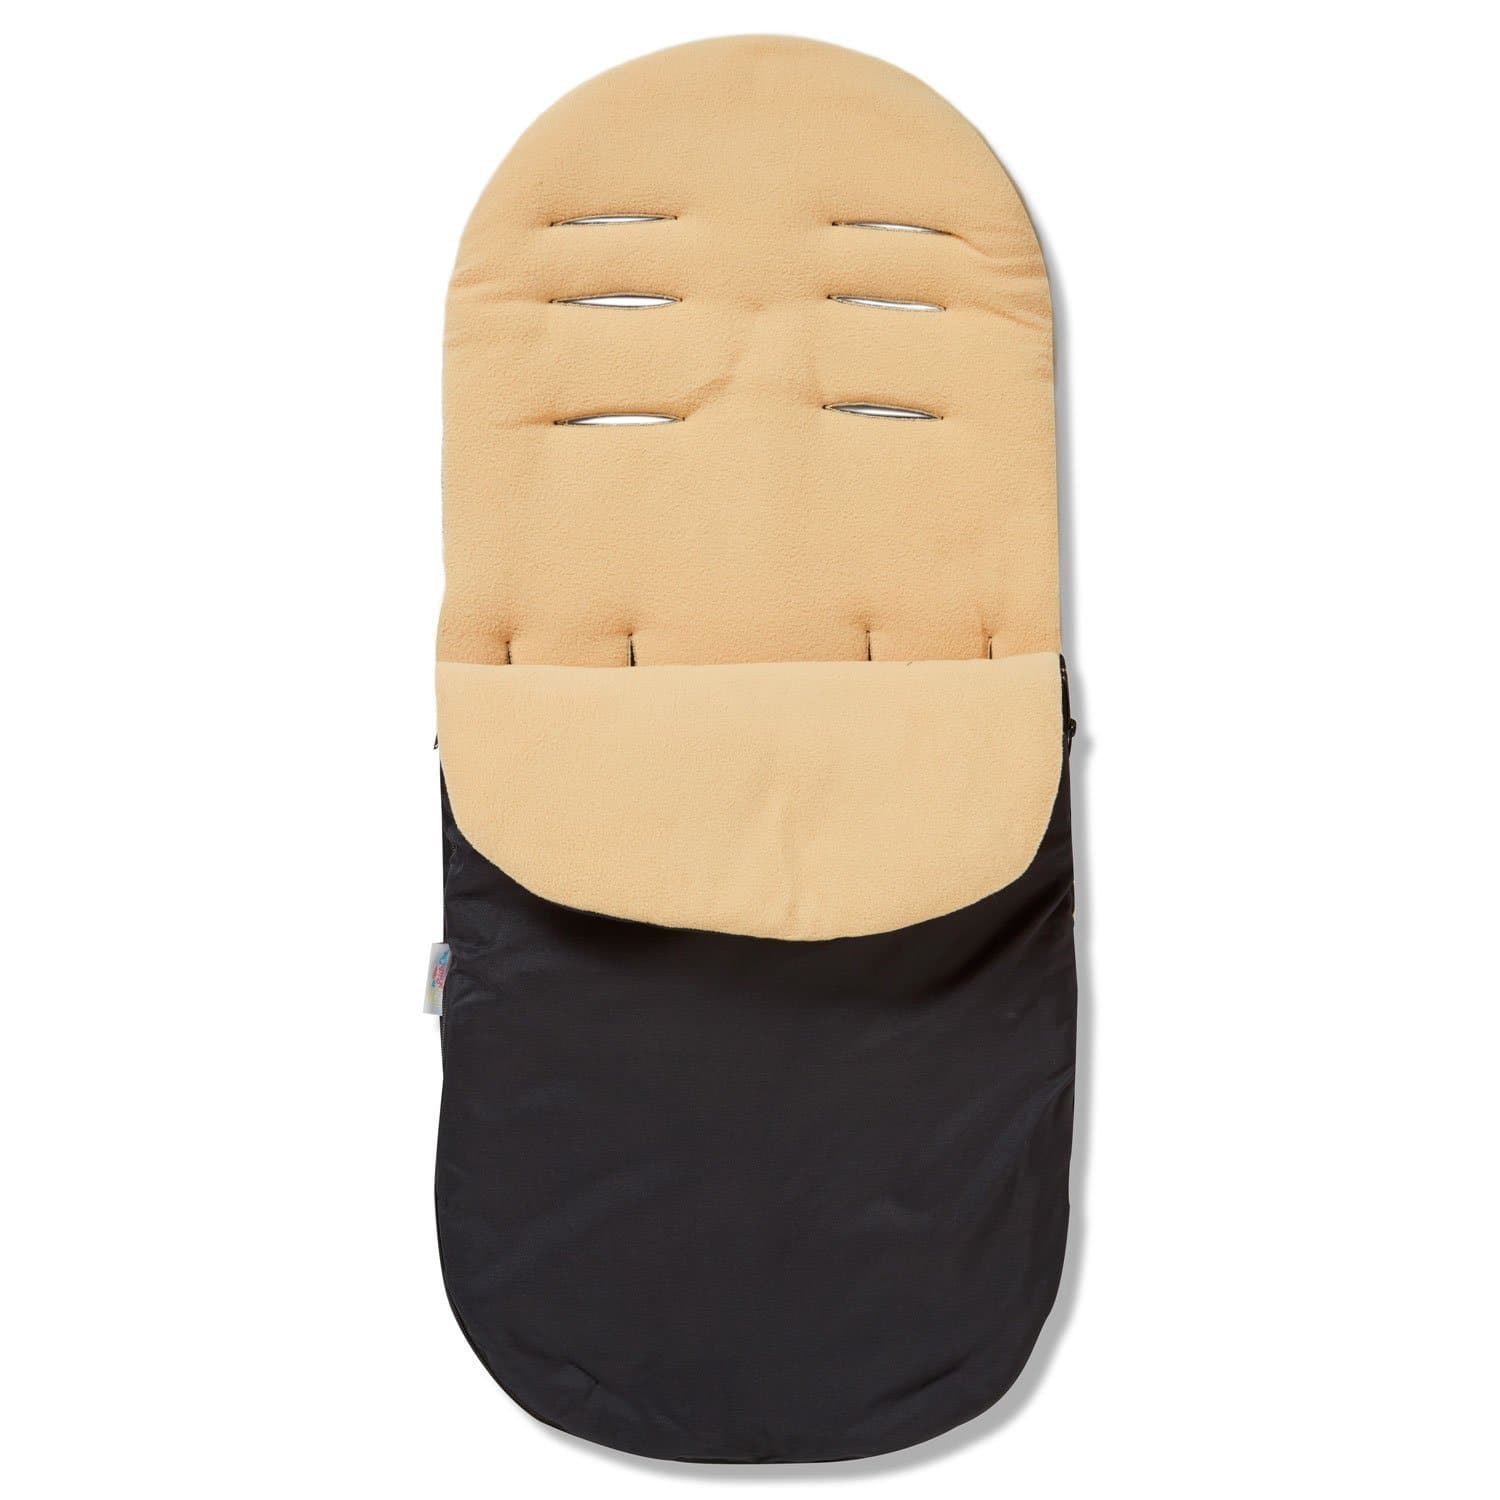 Footmuff / Cosy Toes Compatible with Bebecar - For Your Little One